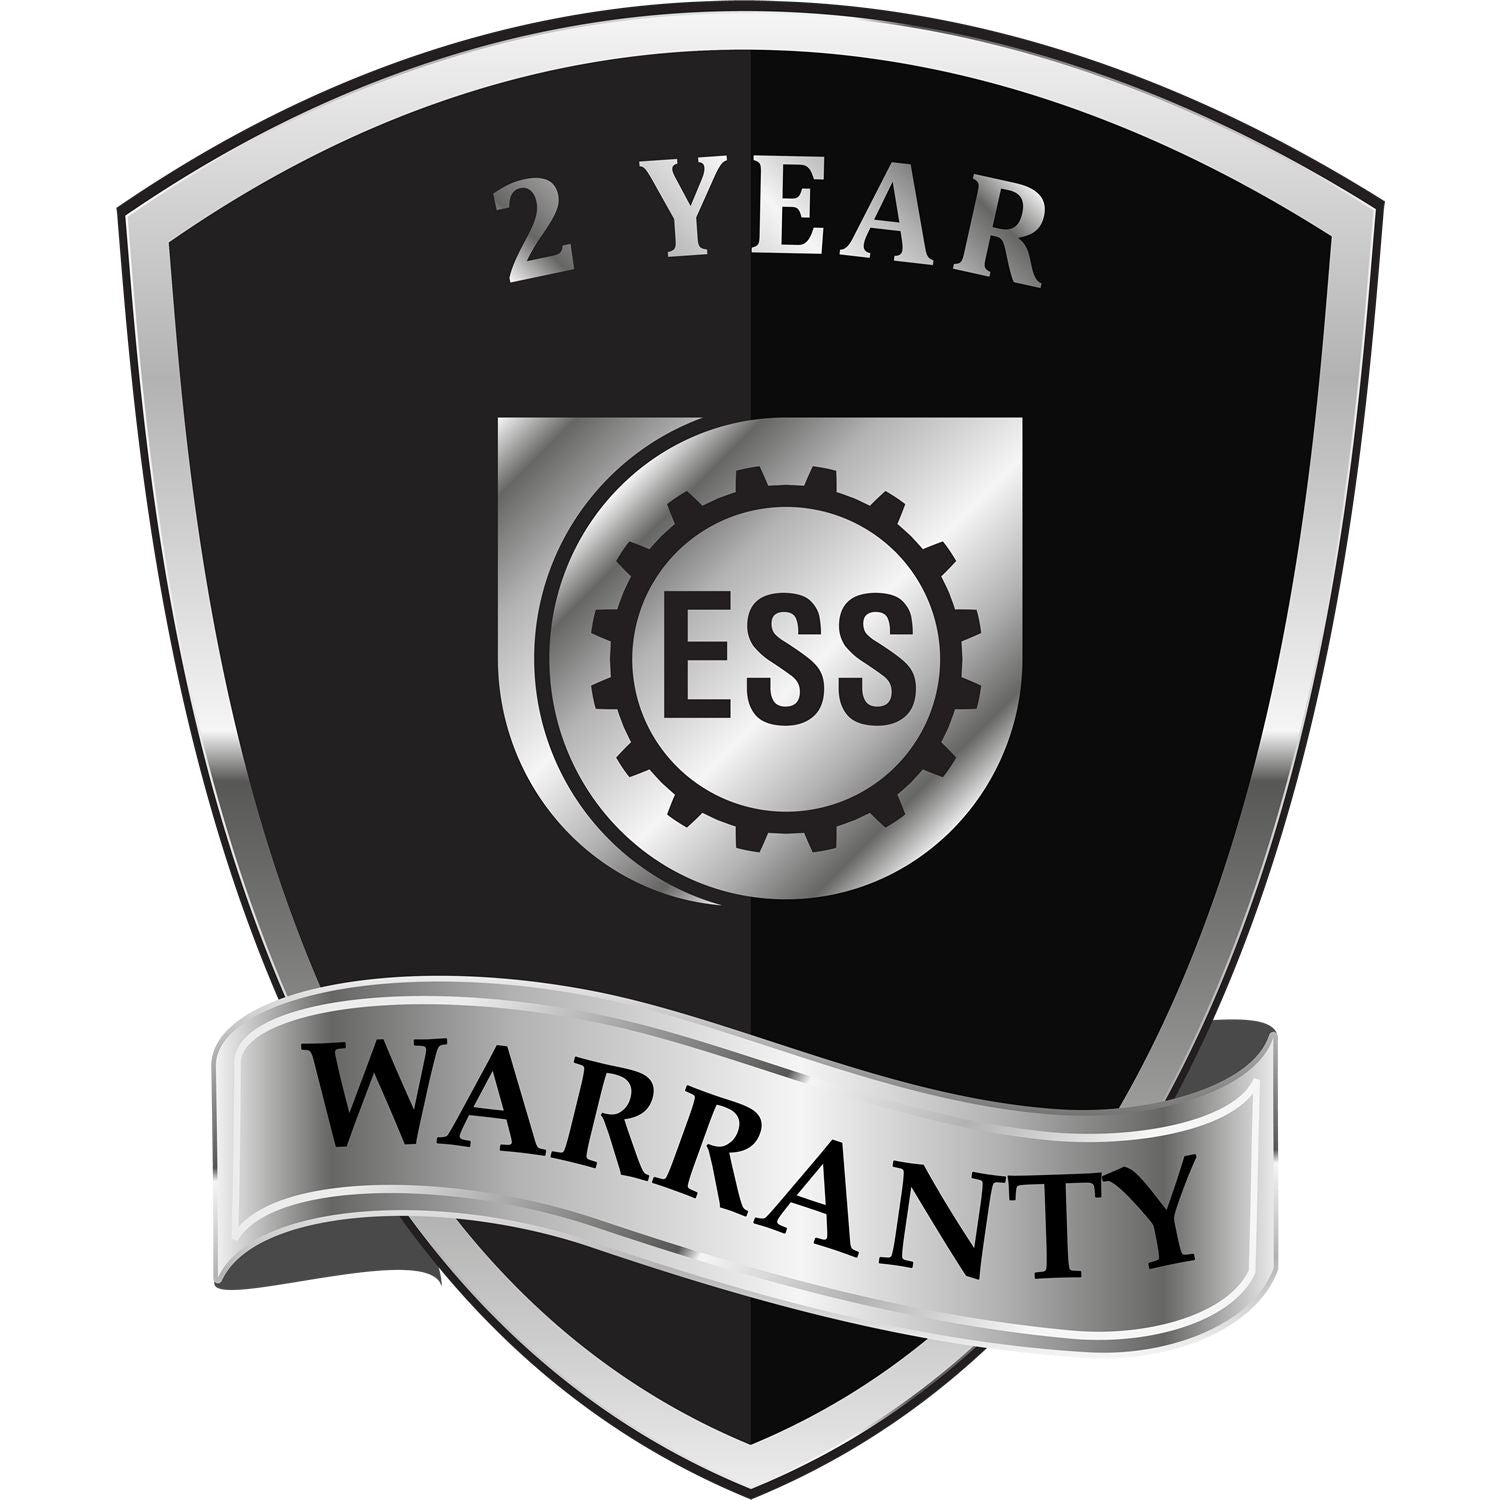 A badge or emblem showing a warranty icon for the Long Reach Tennessee Land Surveyor Seal